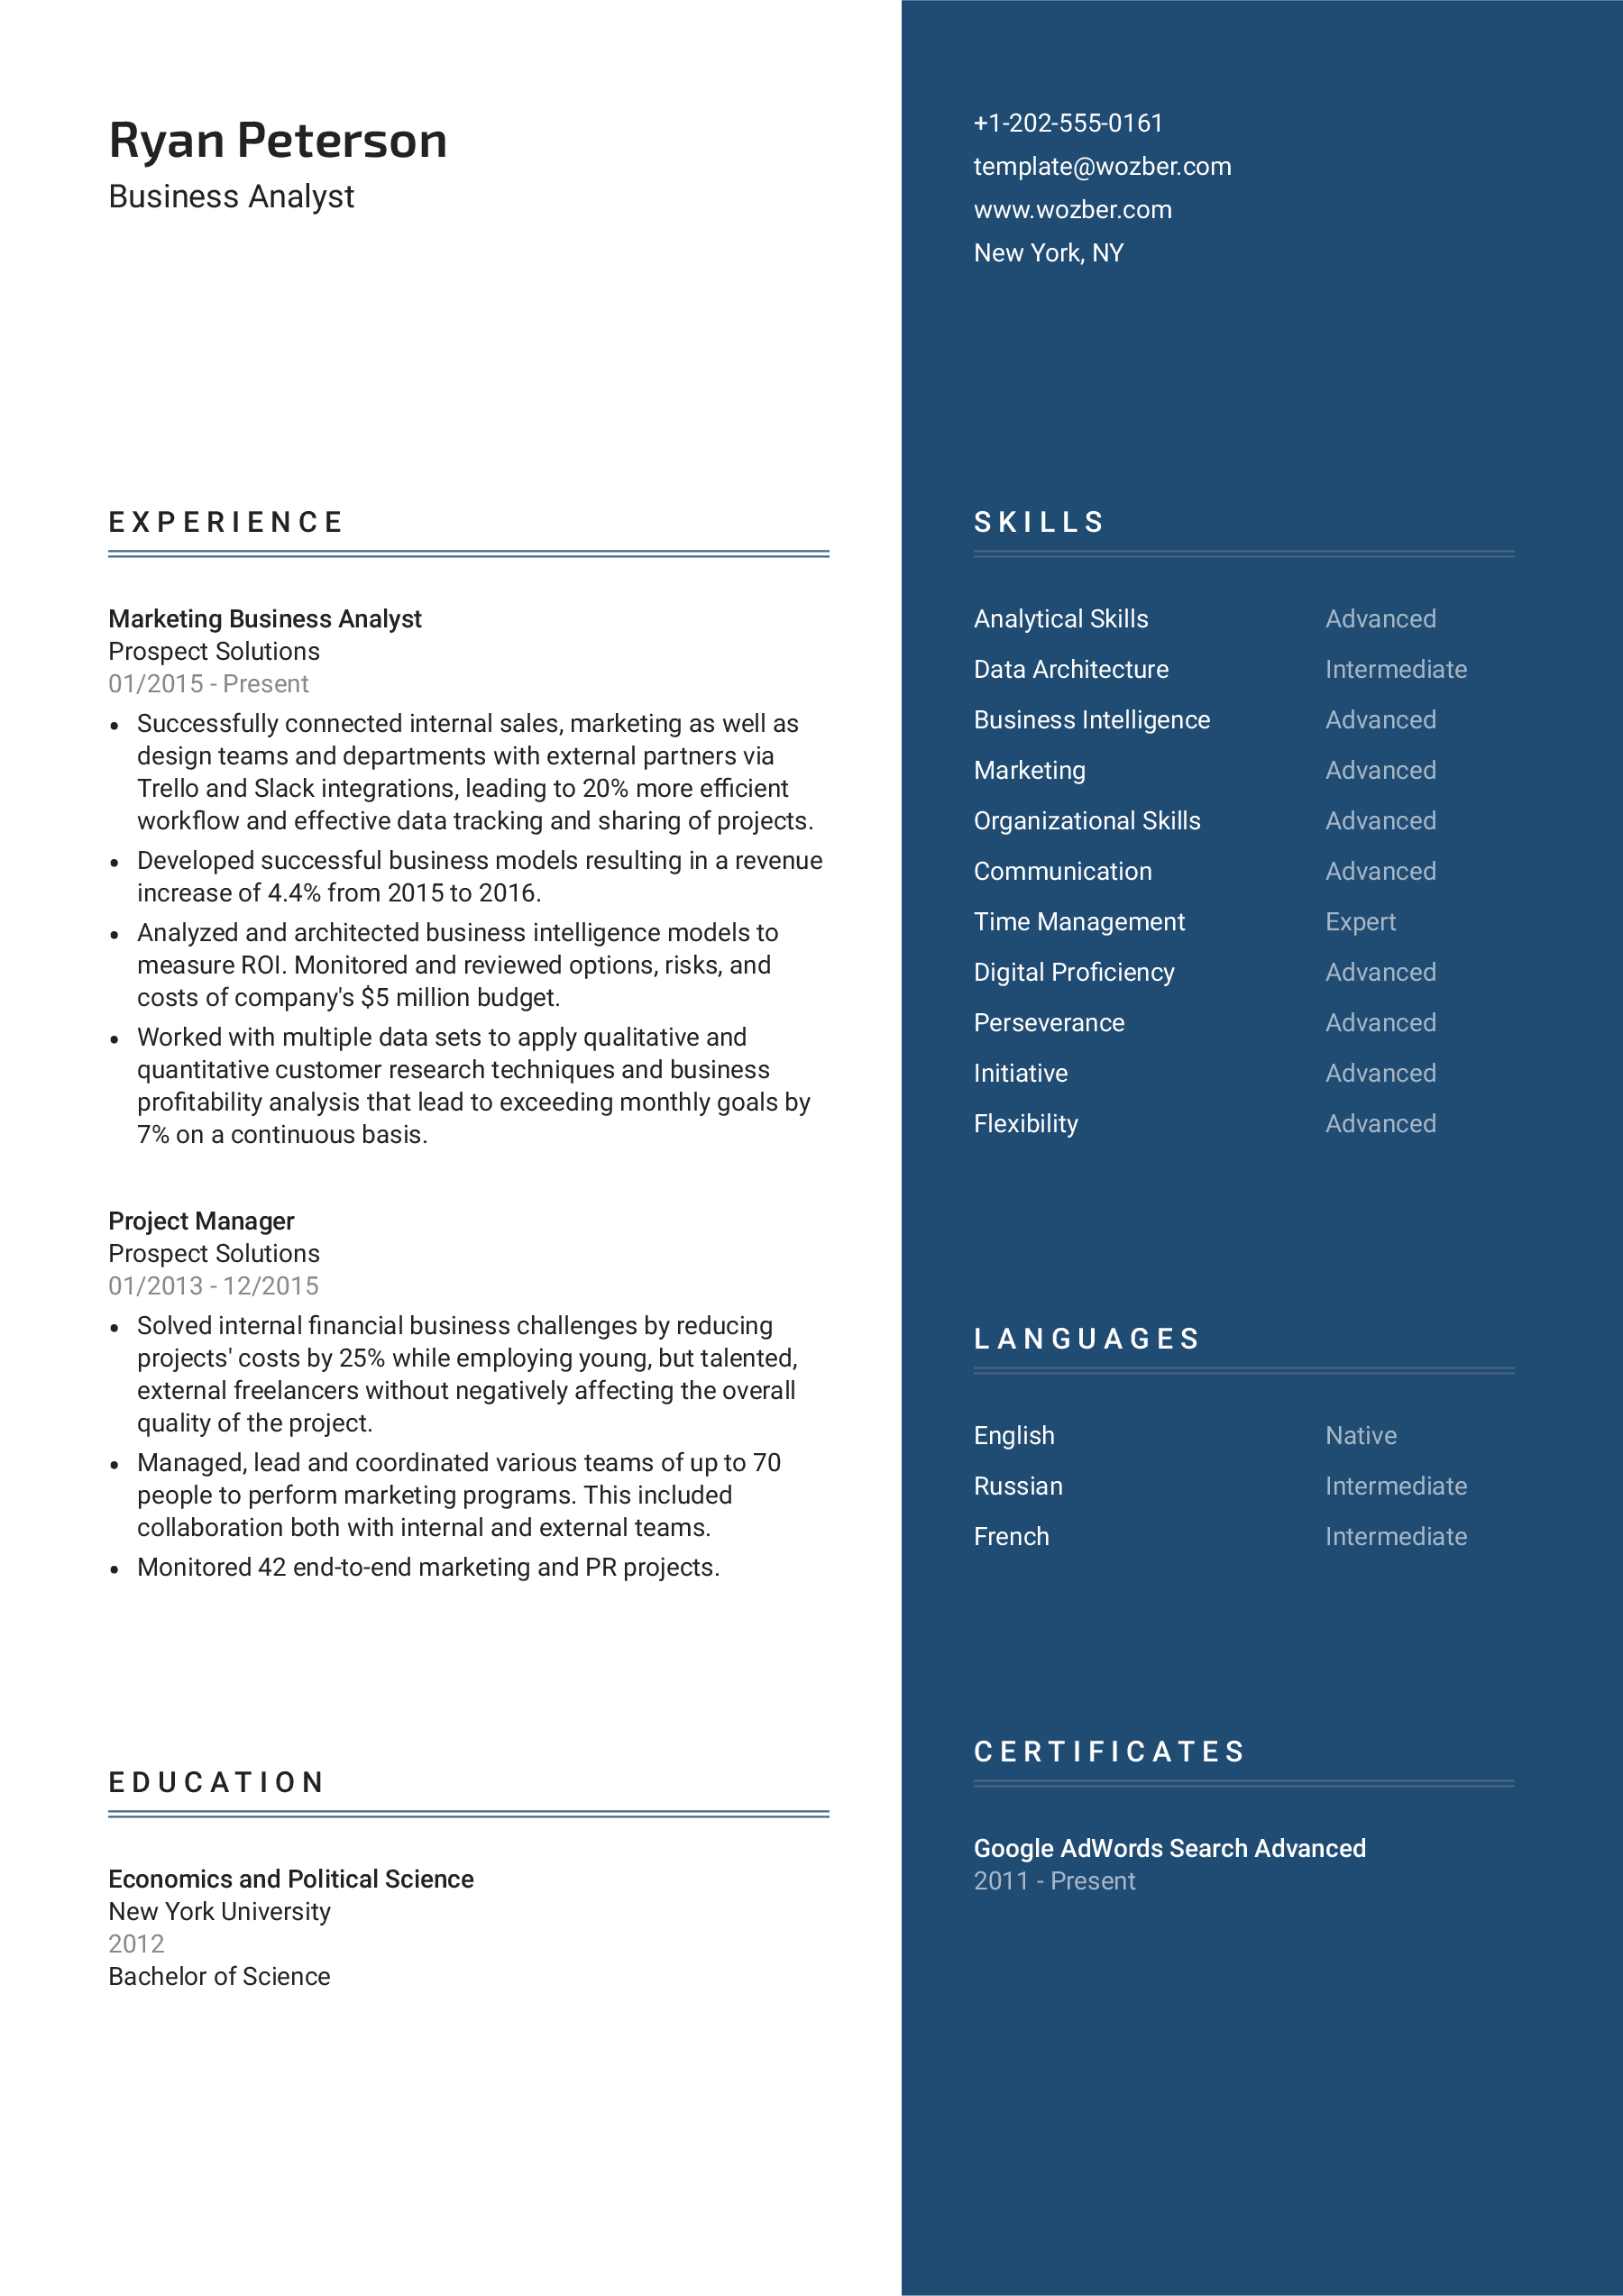 An old-fashioned yet still modern CV template to choose.